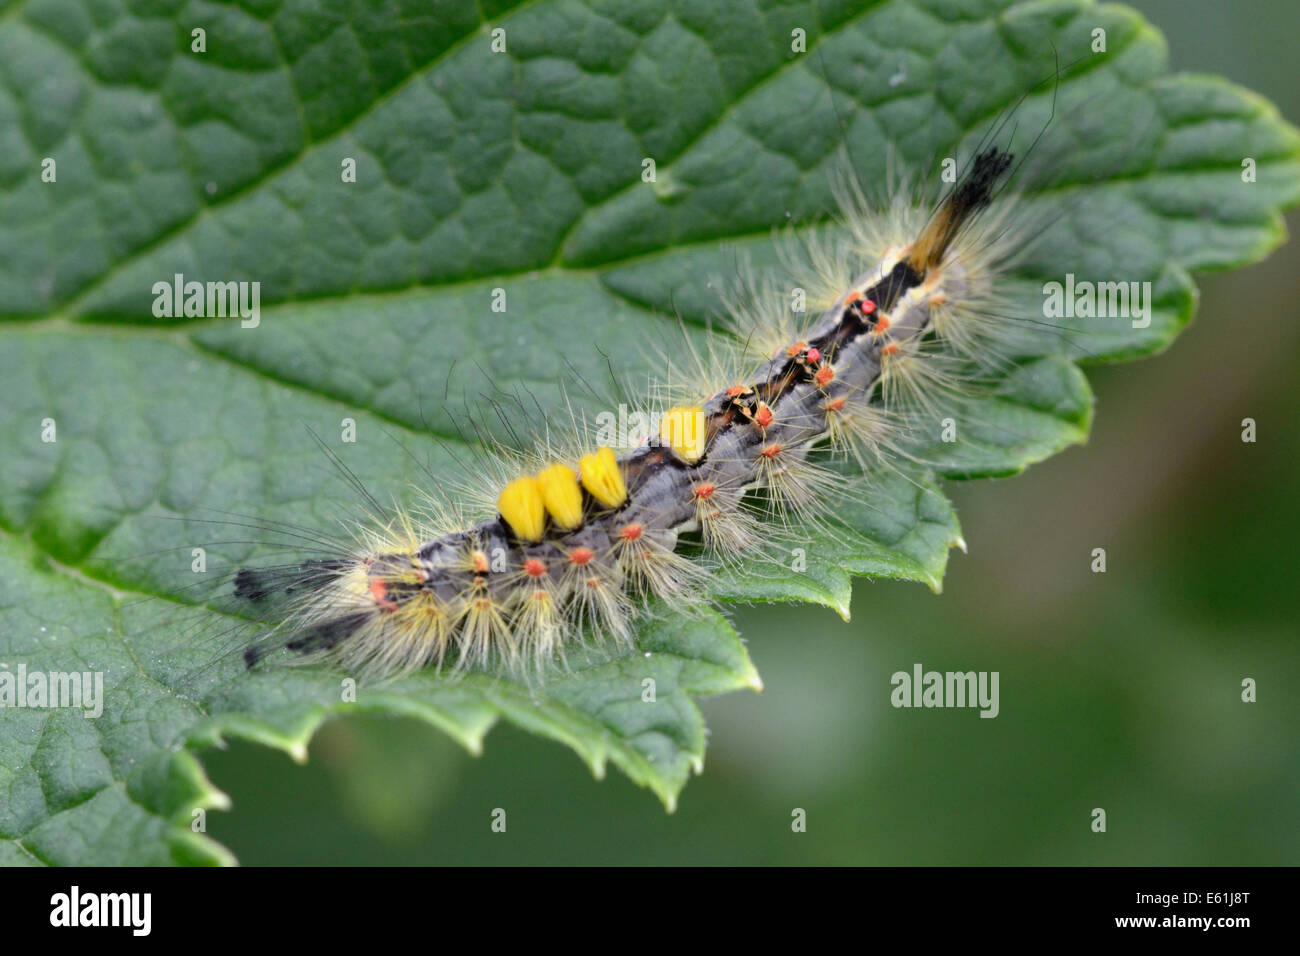 Rusty tussock moth caterpillar (Orgyia antiqua) on red currant leaf Stock Photo